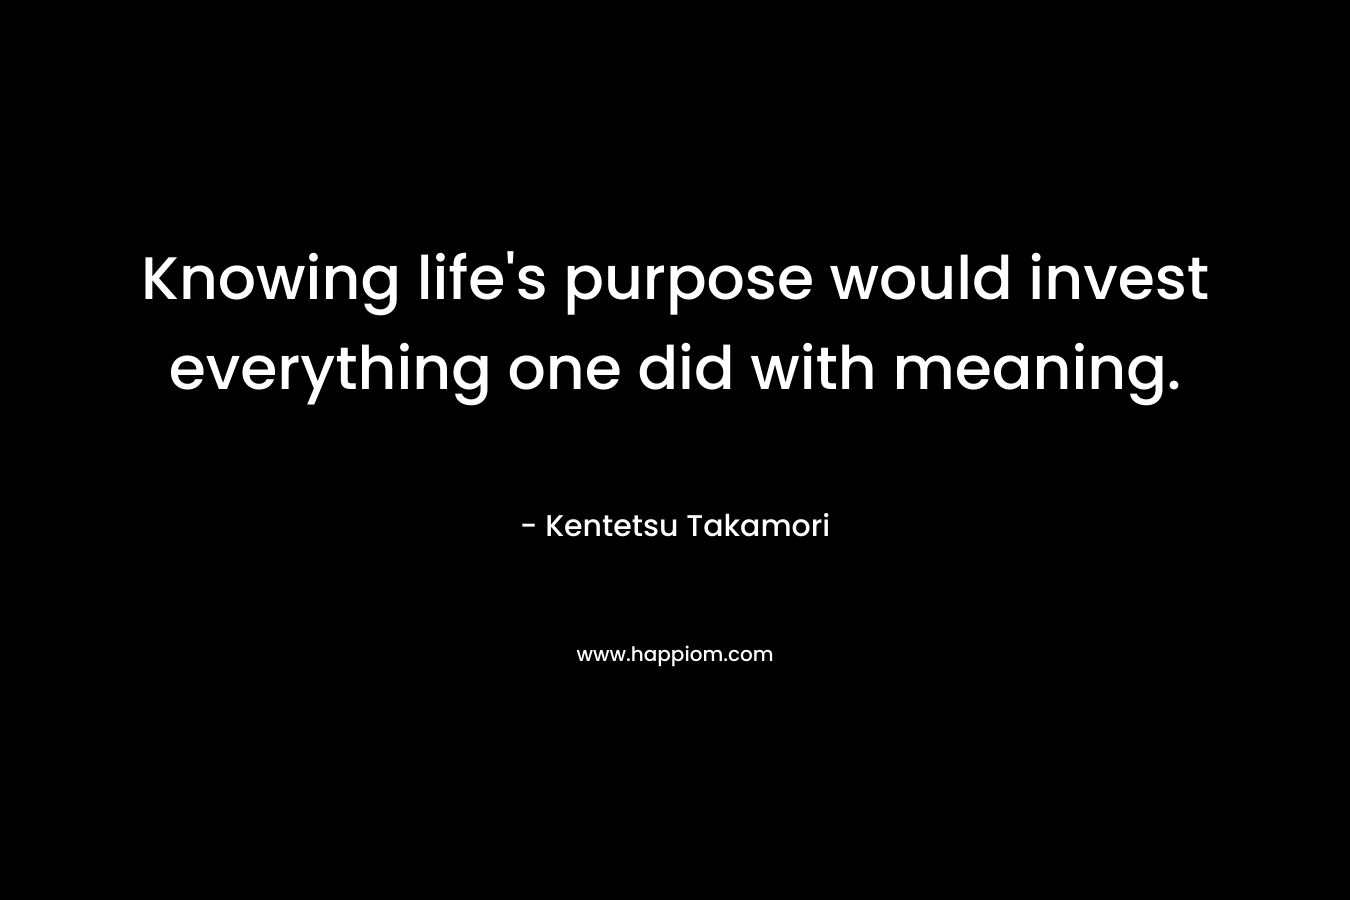 Knowing life’s purpose would invest everything one did with meaning. – Kentetsu Takamori